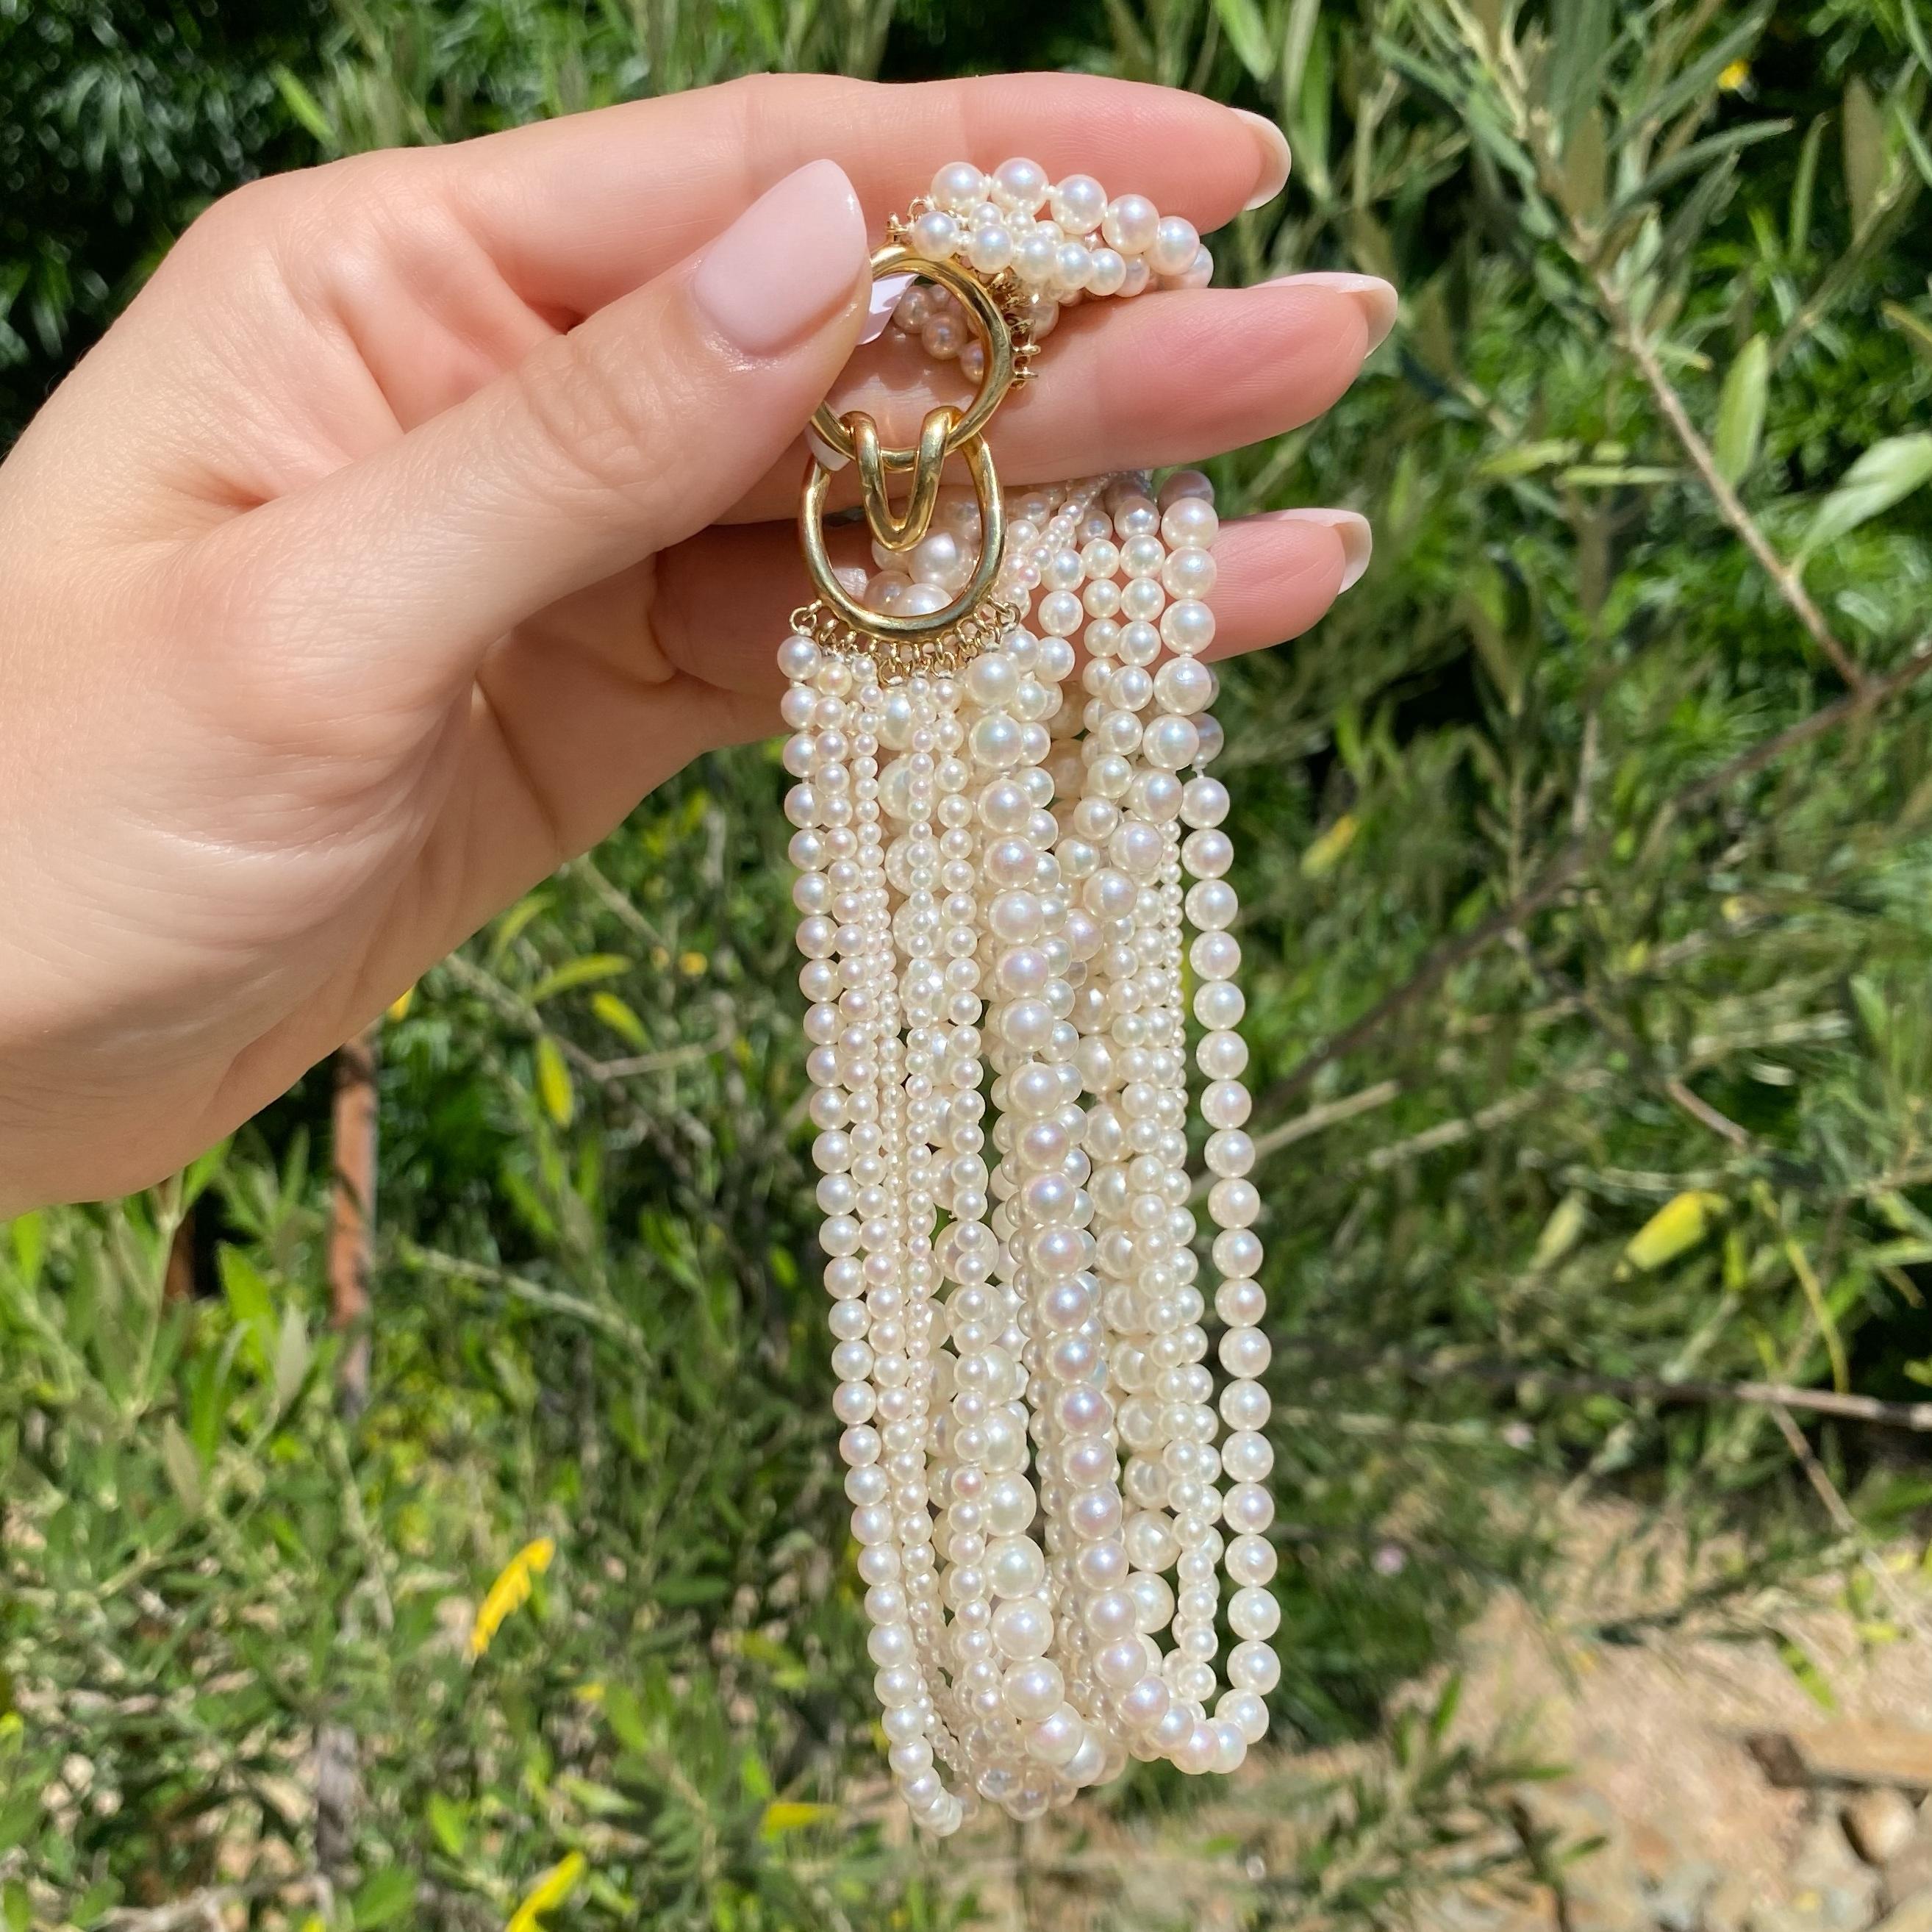 Simply Beautiful! Fine Tiffany & Co. 6.5mm-2.4mm Cultured Pearl 11 Strand Necklace held by an 18K Yellow Gold circular clasp. Approx. length of Necklace: 16”. Signed TIFFANY & CO. and marked 18K.  More Beautiful in real time...A piece you’ll turn to